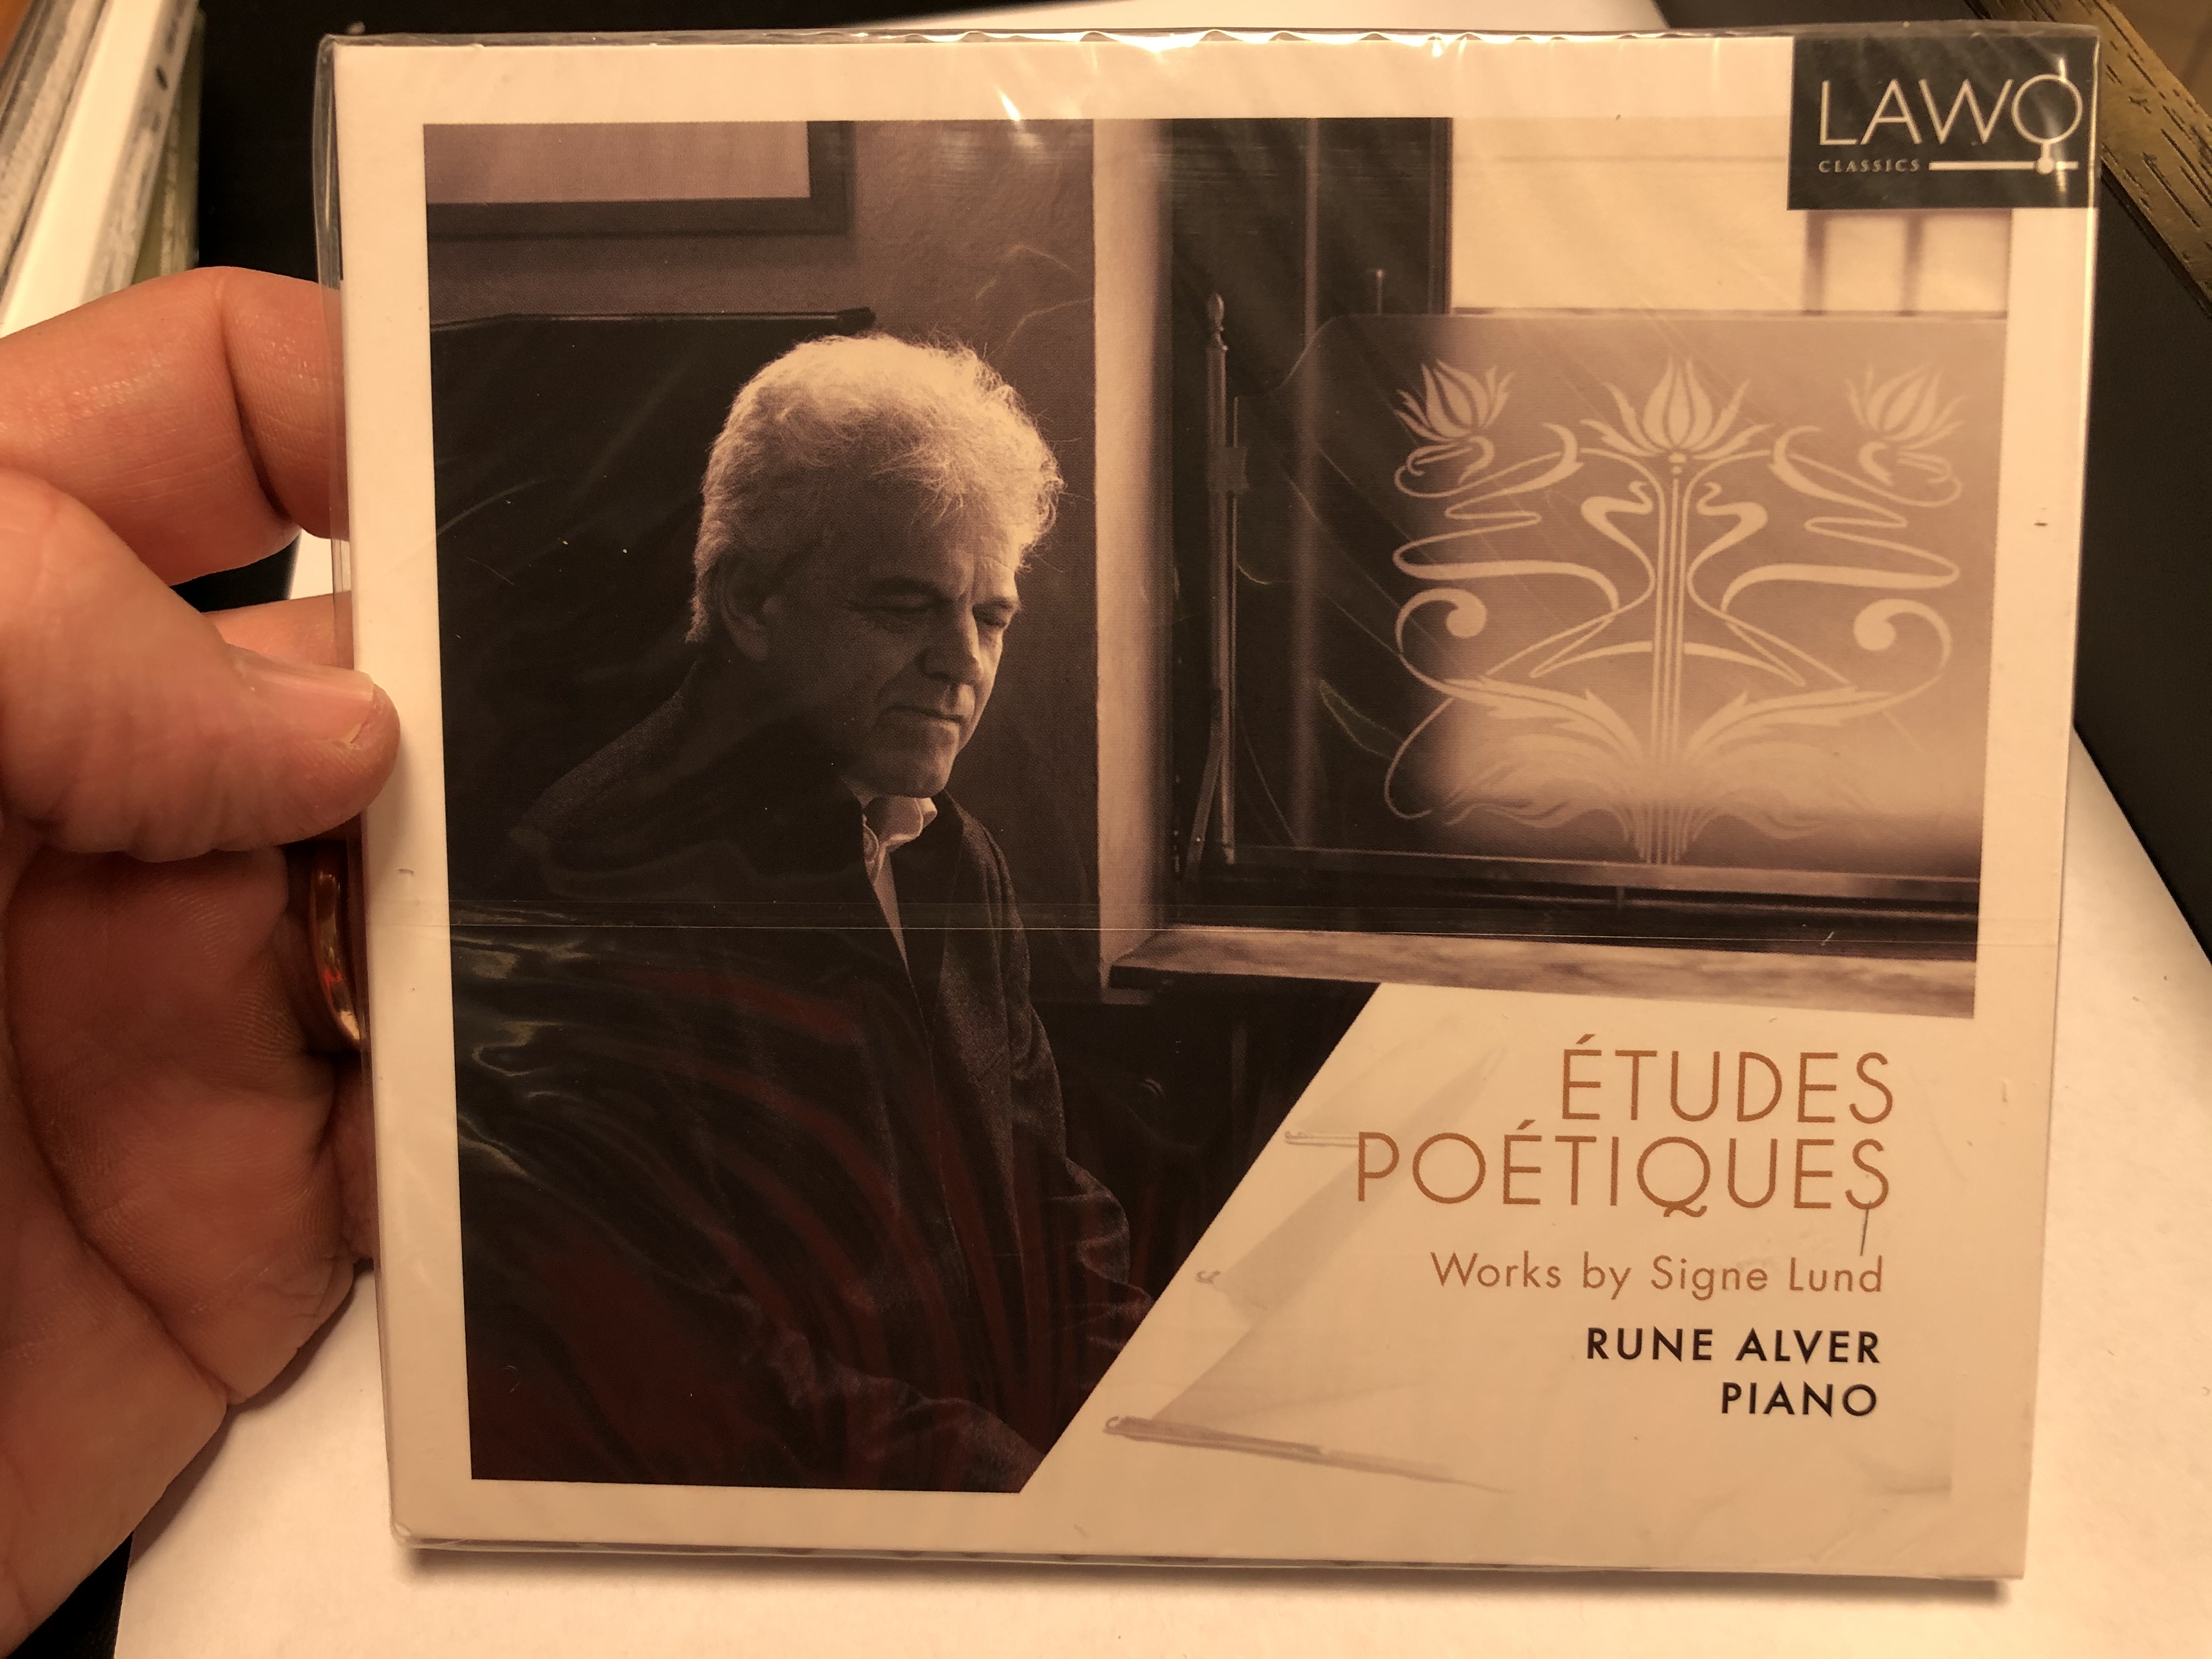 etudes-poetiques-works-by-signe-lund-rune-alver-piano-lawo-audio-cd-2020-stereo-lwc1196-1-.jpg